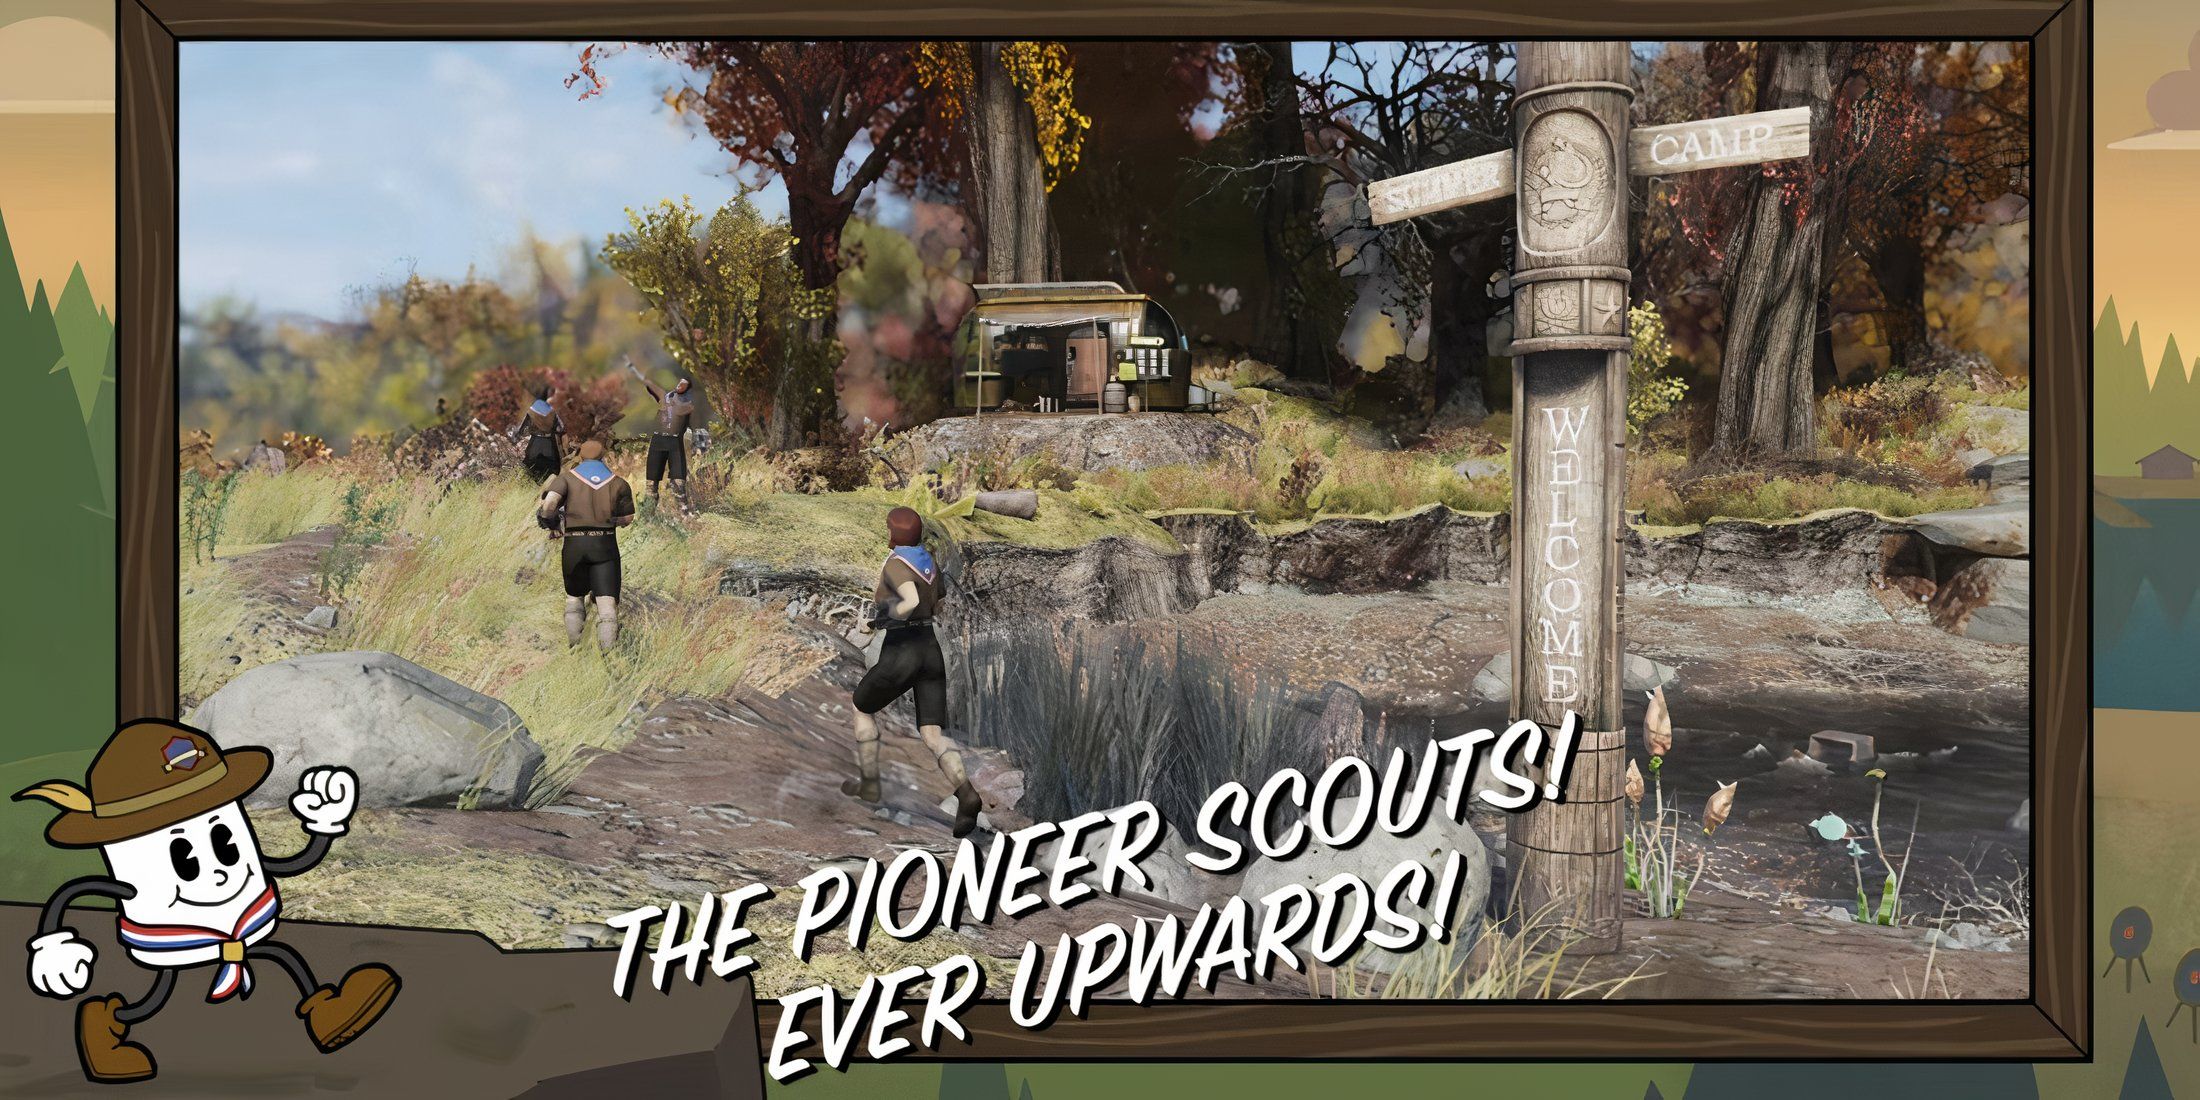 Fallout 76 — трейлер 17-го сезона Pioneer Scouts Skyline Valley